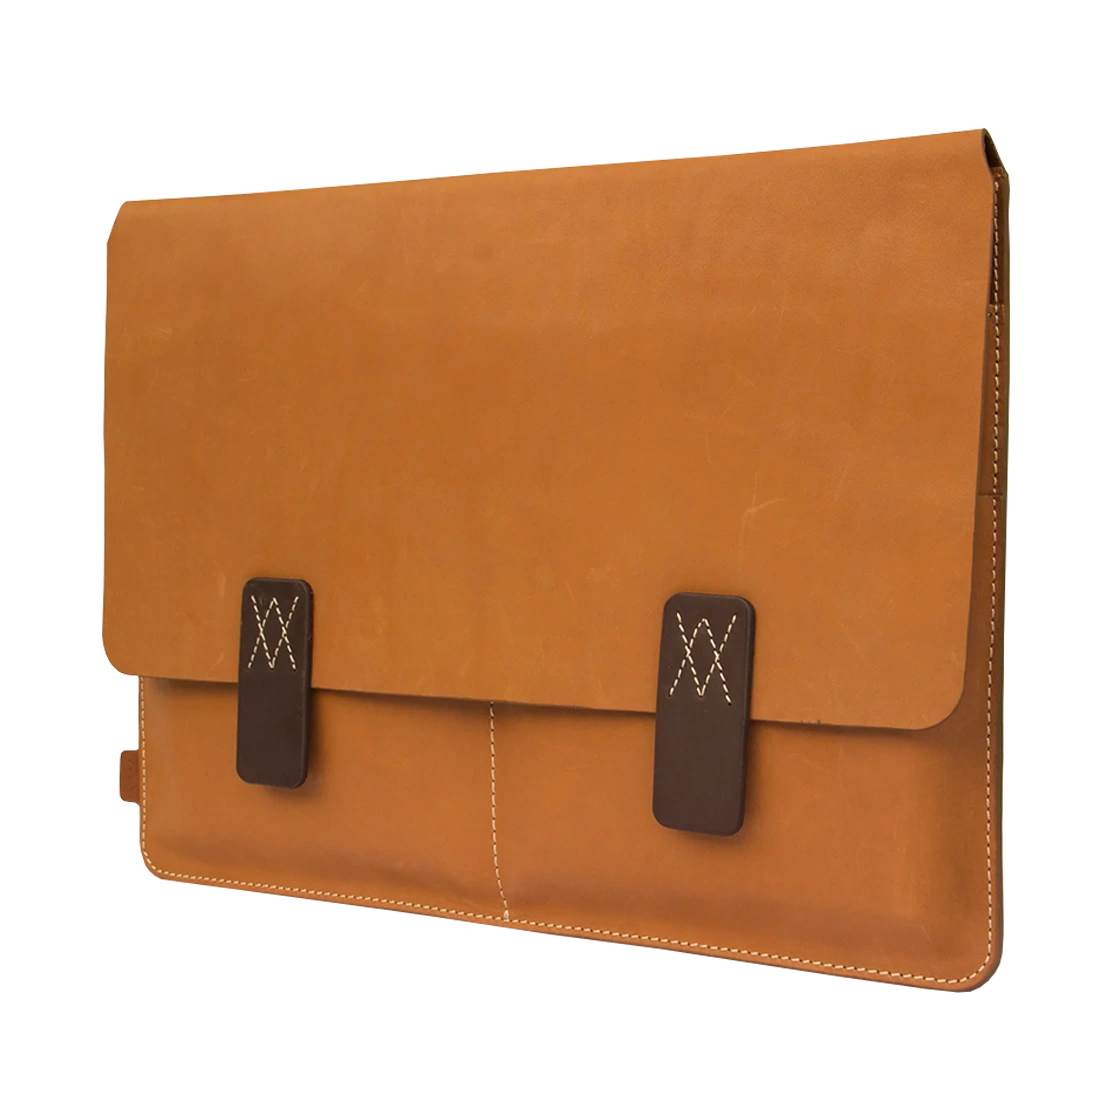 Vorya Premium Natural Leather Cover for MacBook 12-inch